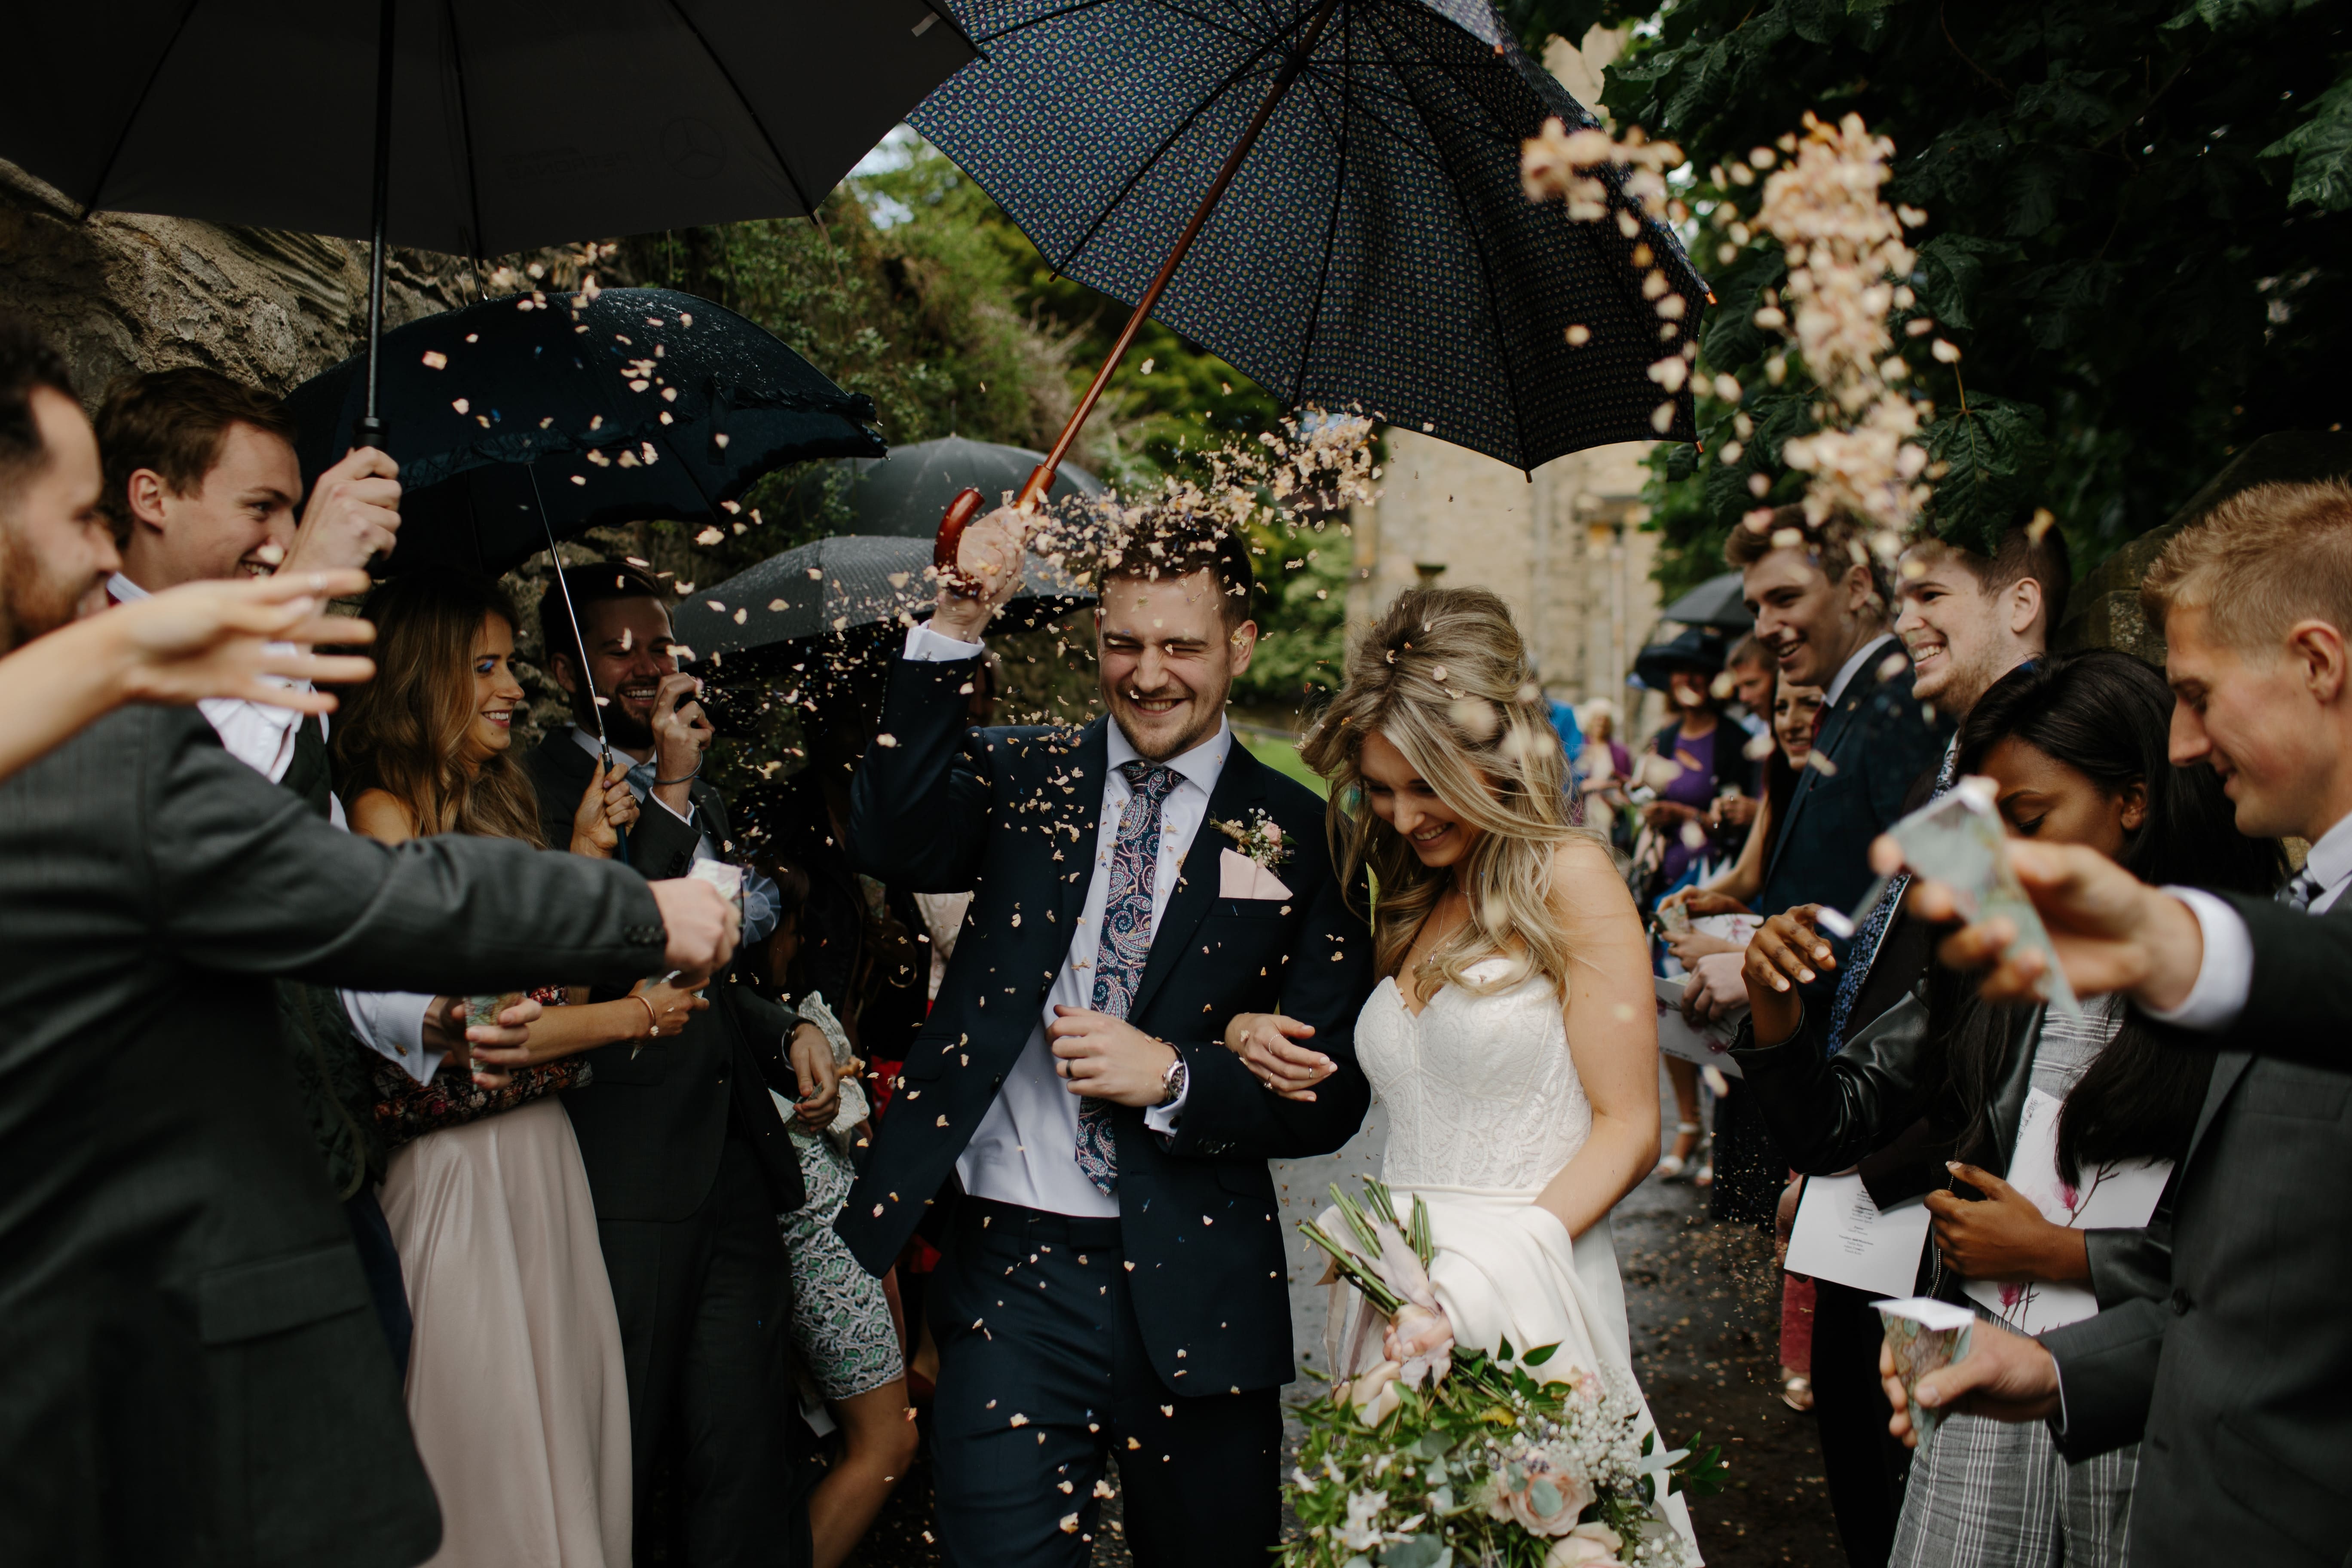 Going into debt for your wedding shouldnt't be on the table. Check out how we planned a debt free wedding and how you can too.